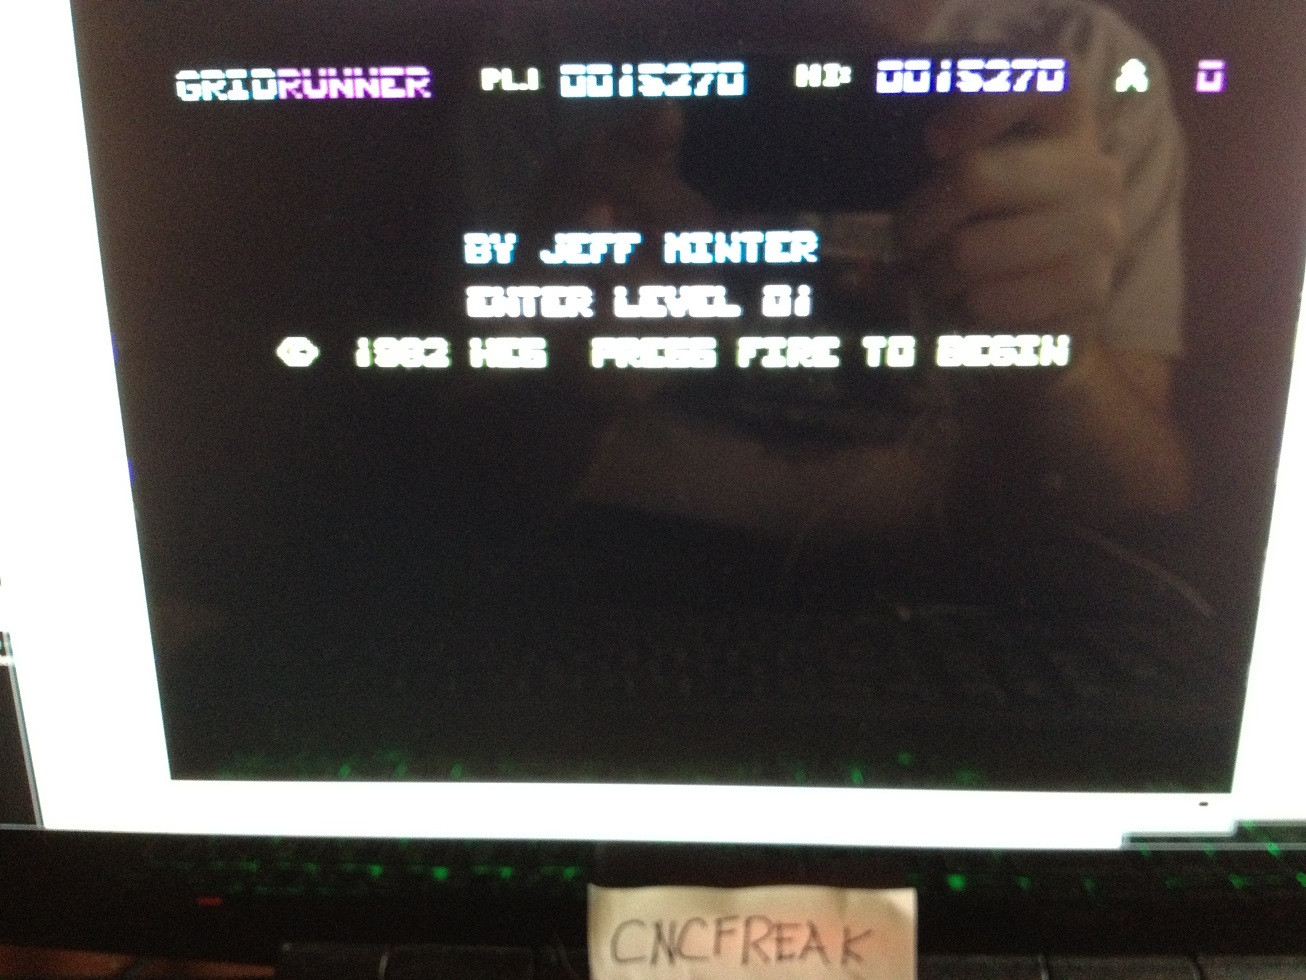 cncfreak: Gridrunner (Commodore 64 Emulated) 15,270 points on 2013-10-04 08:08:15